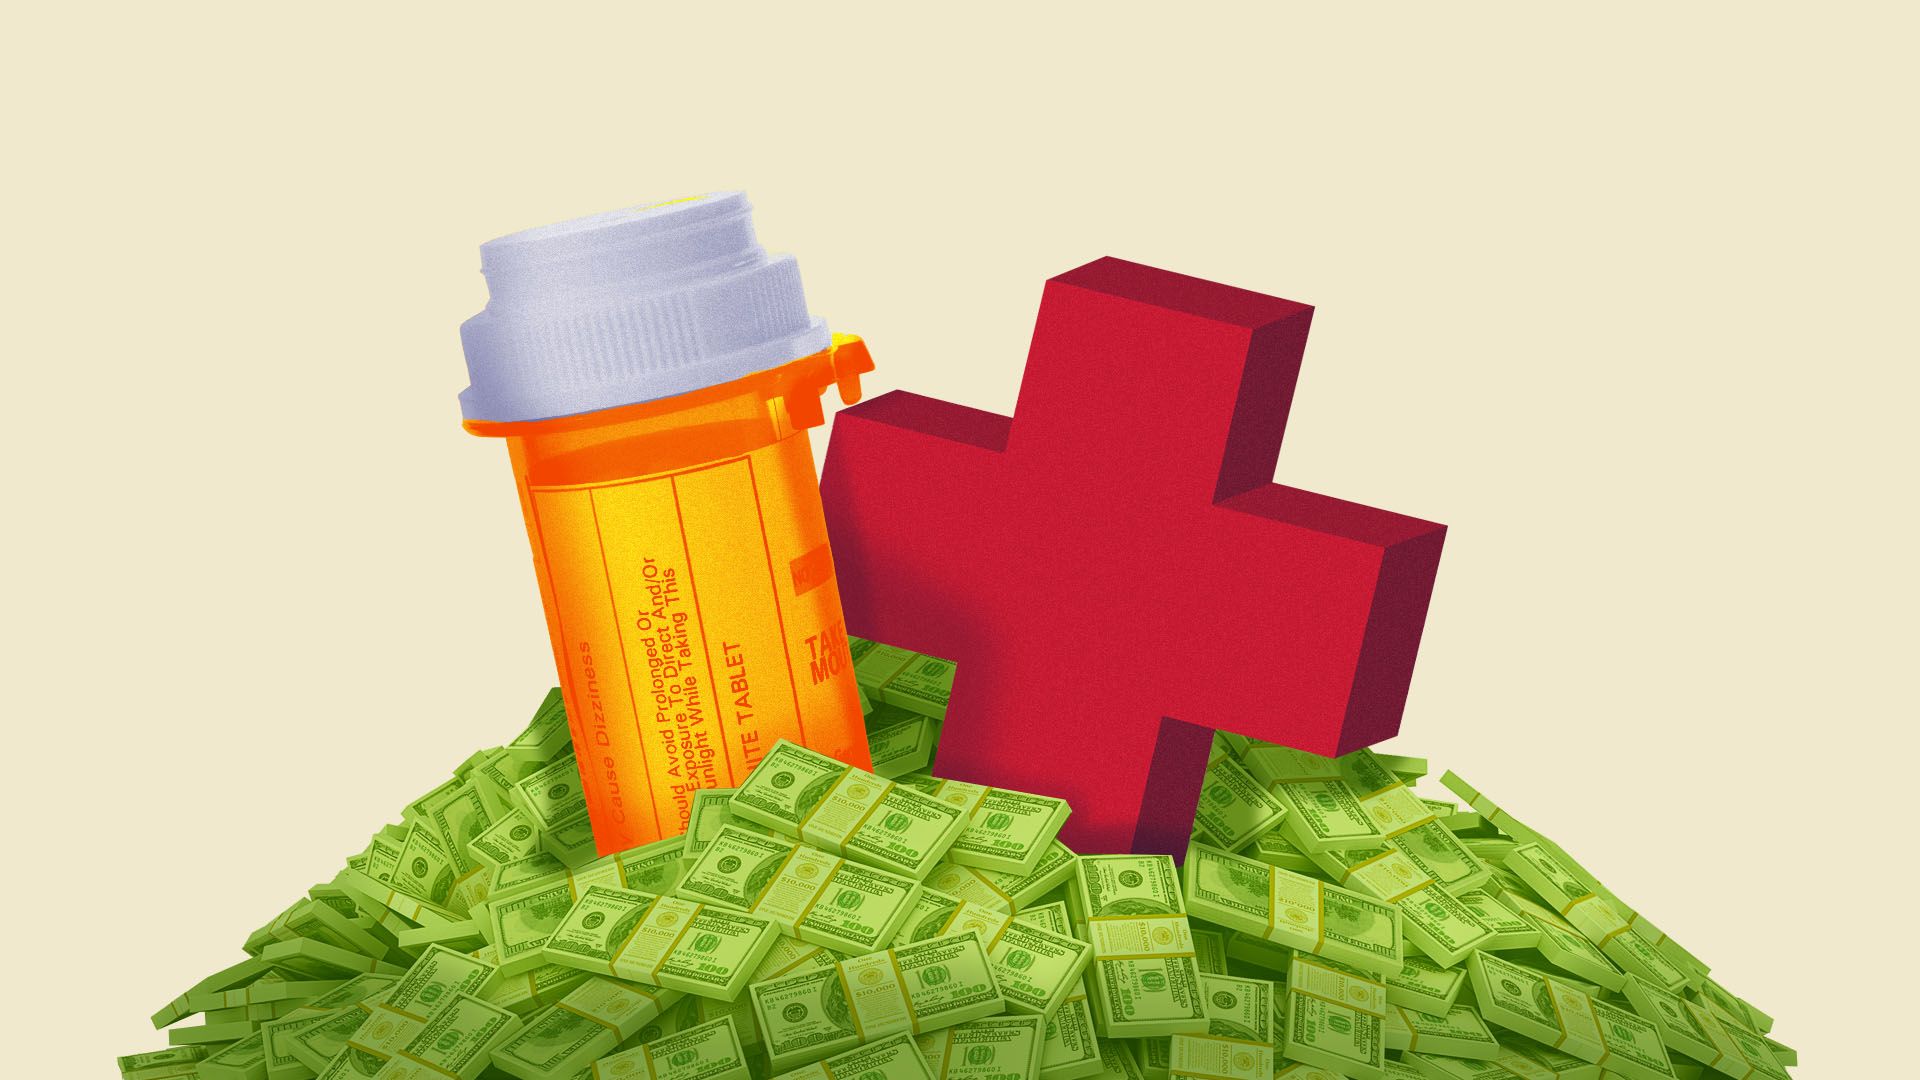 Illustration of a red cross and a pill bottle in a pile of money.